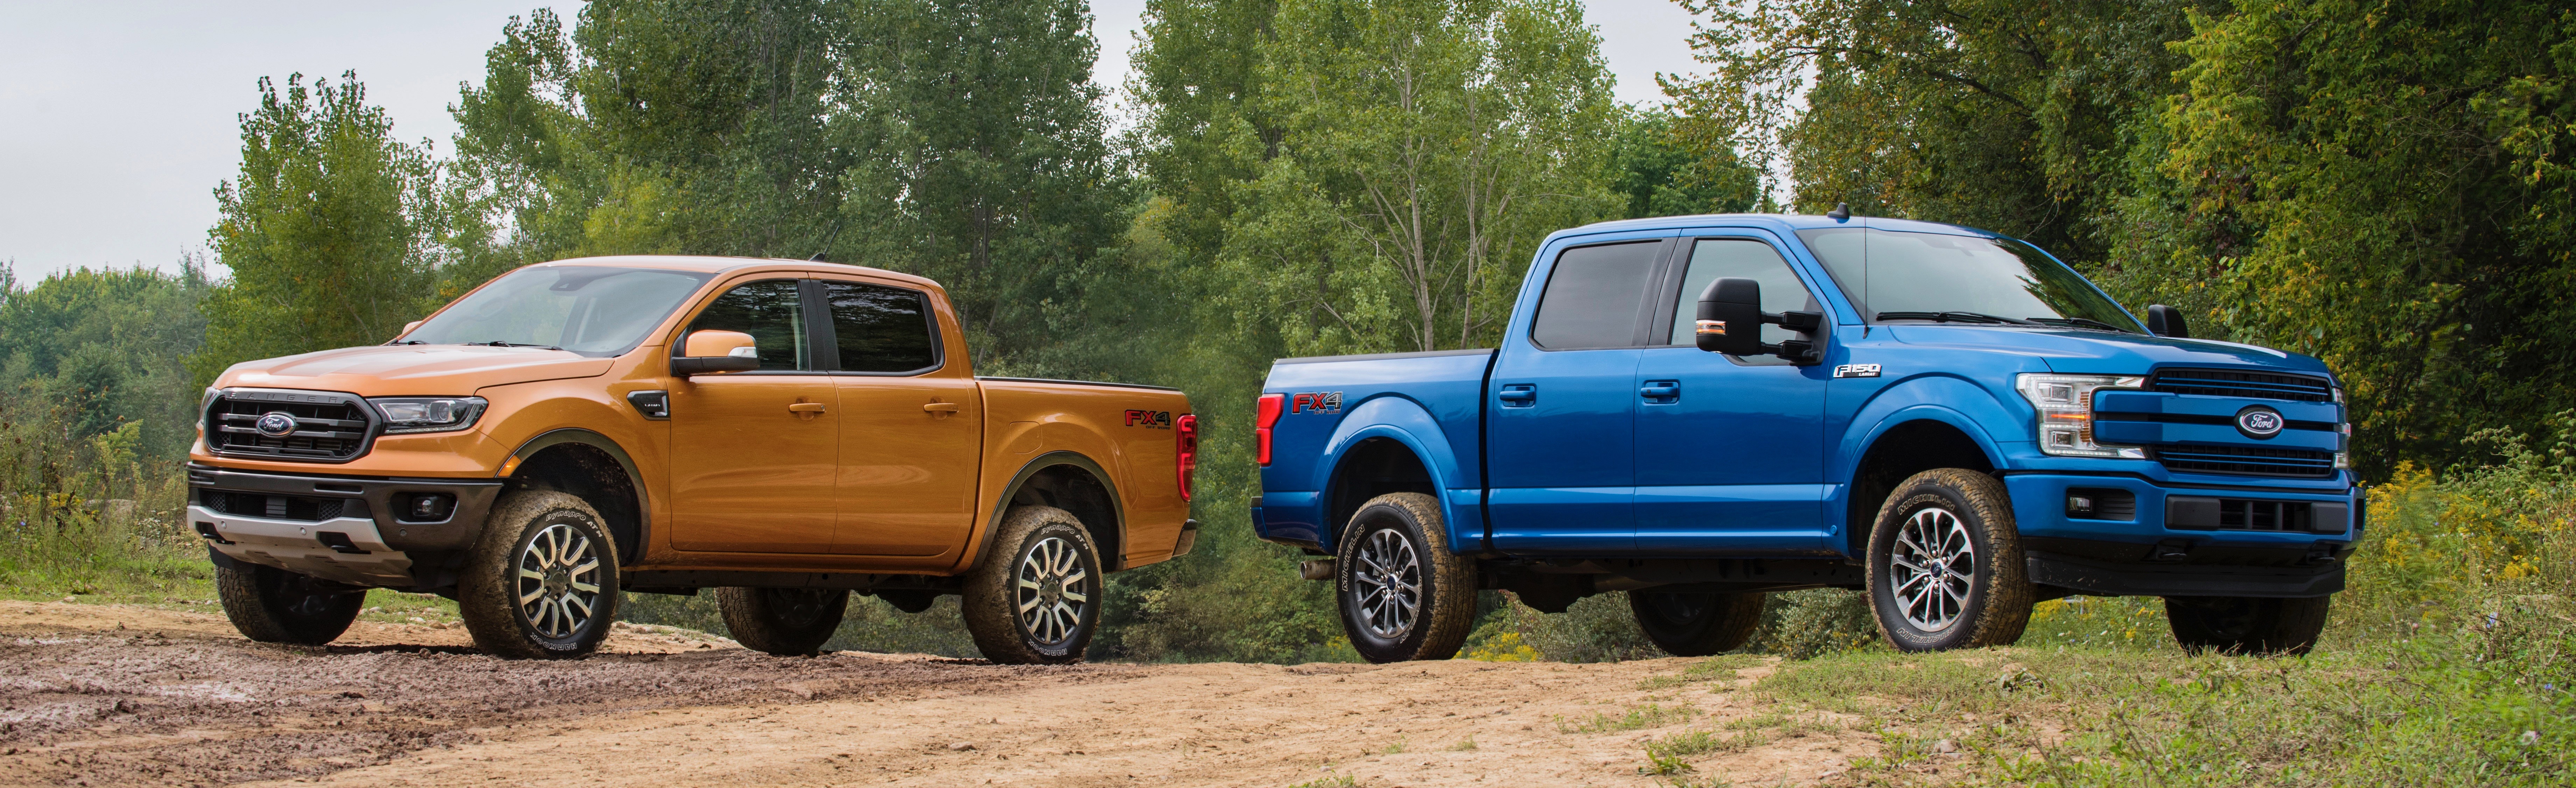 Ford pickup trucks, Ford offers off-road leveling suspension for its pickup trucks, ClassicCars.com Journal